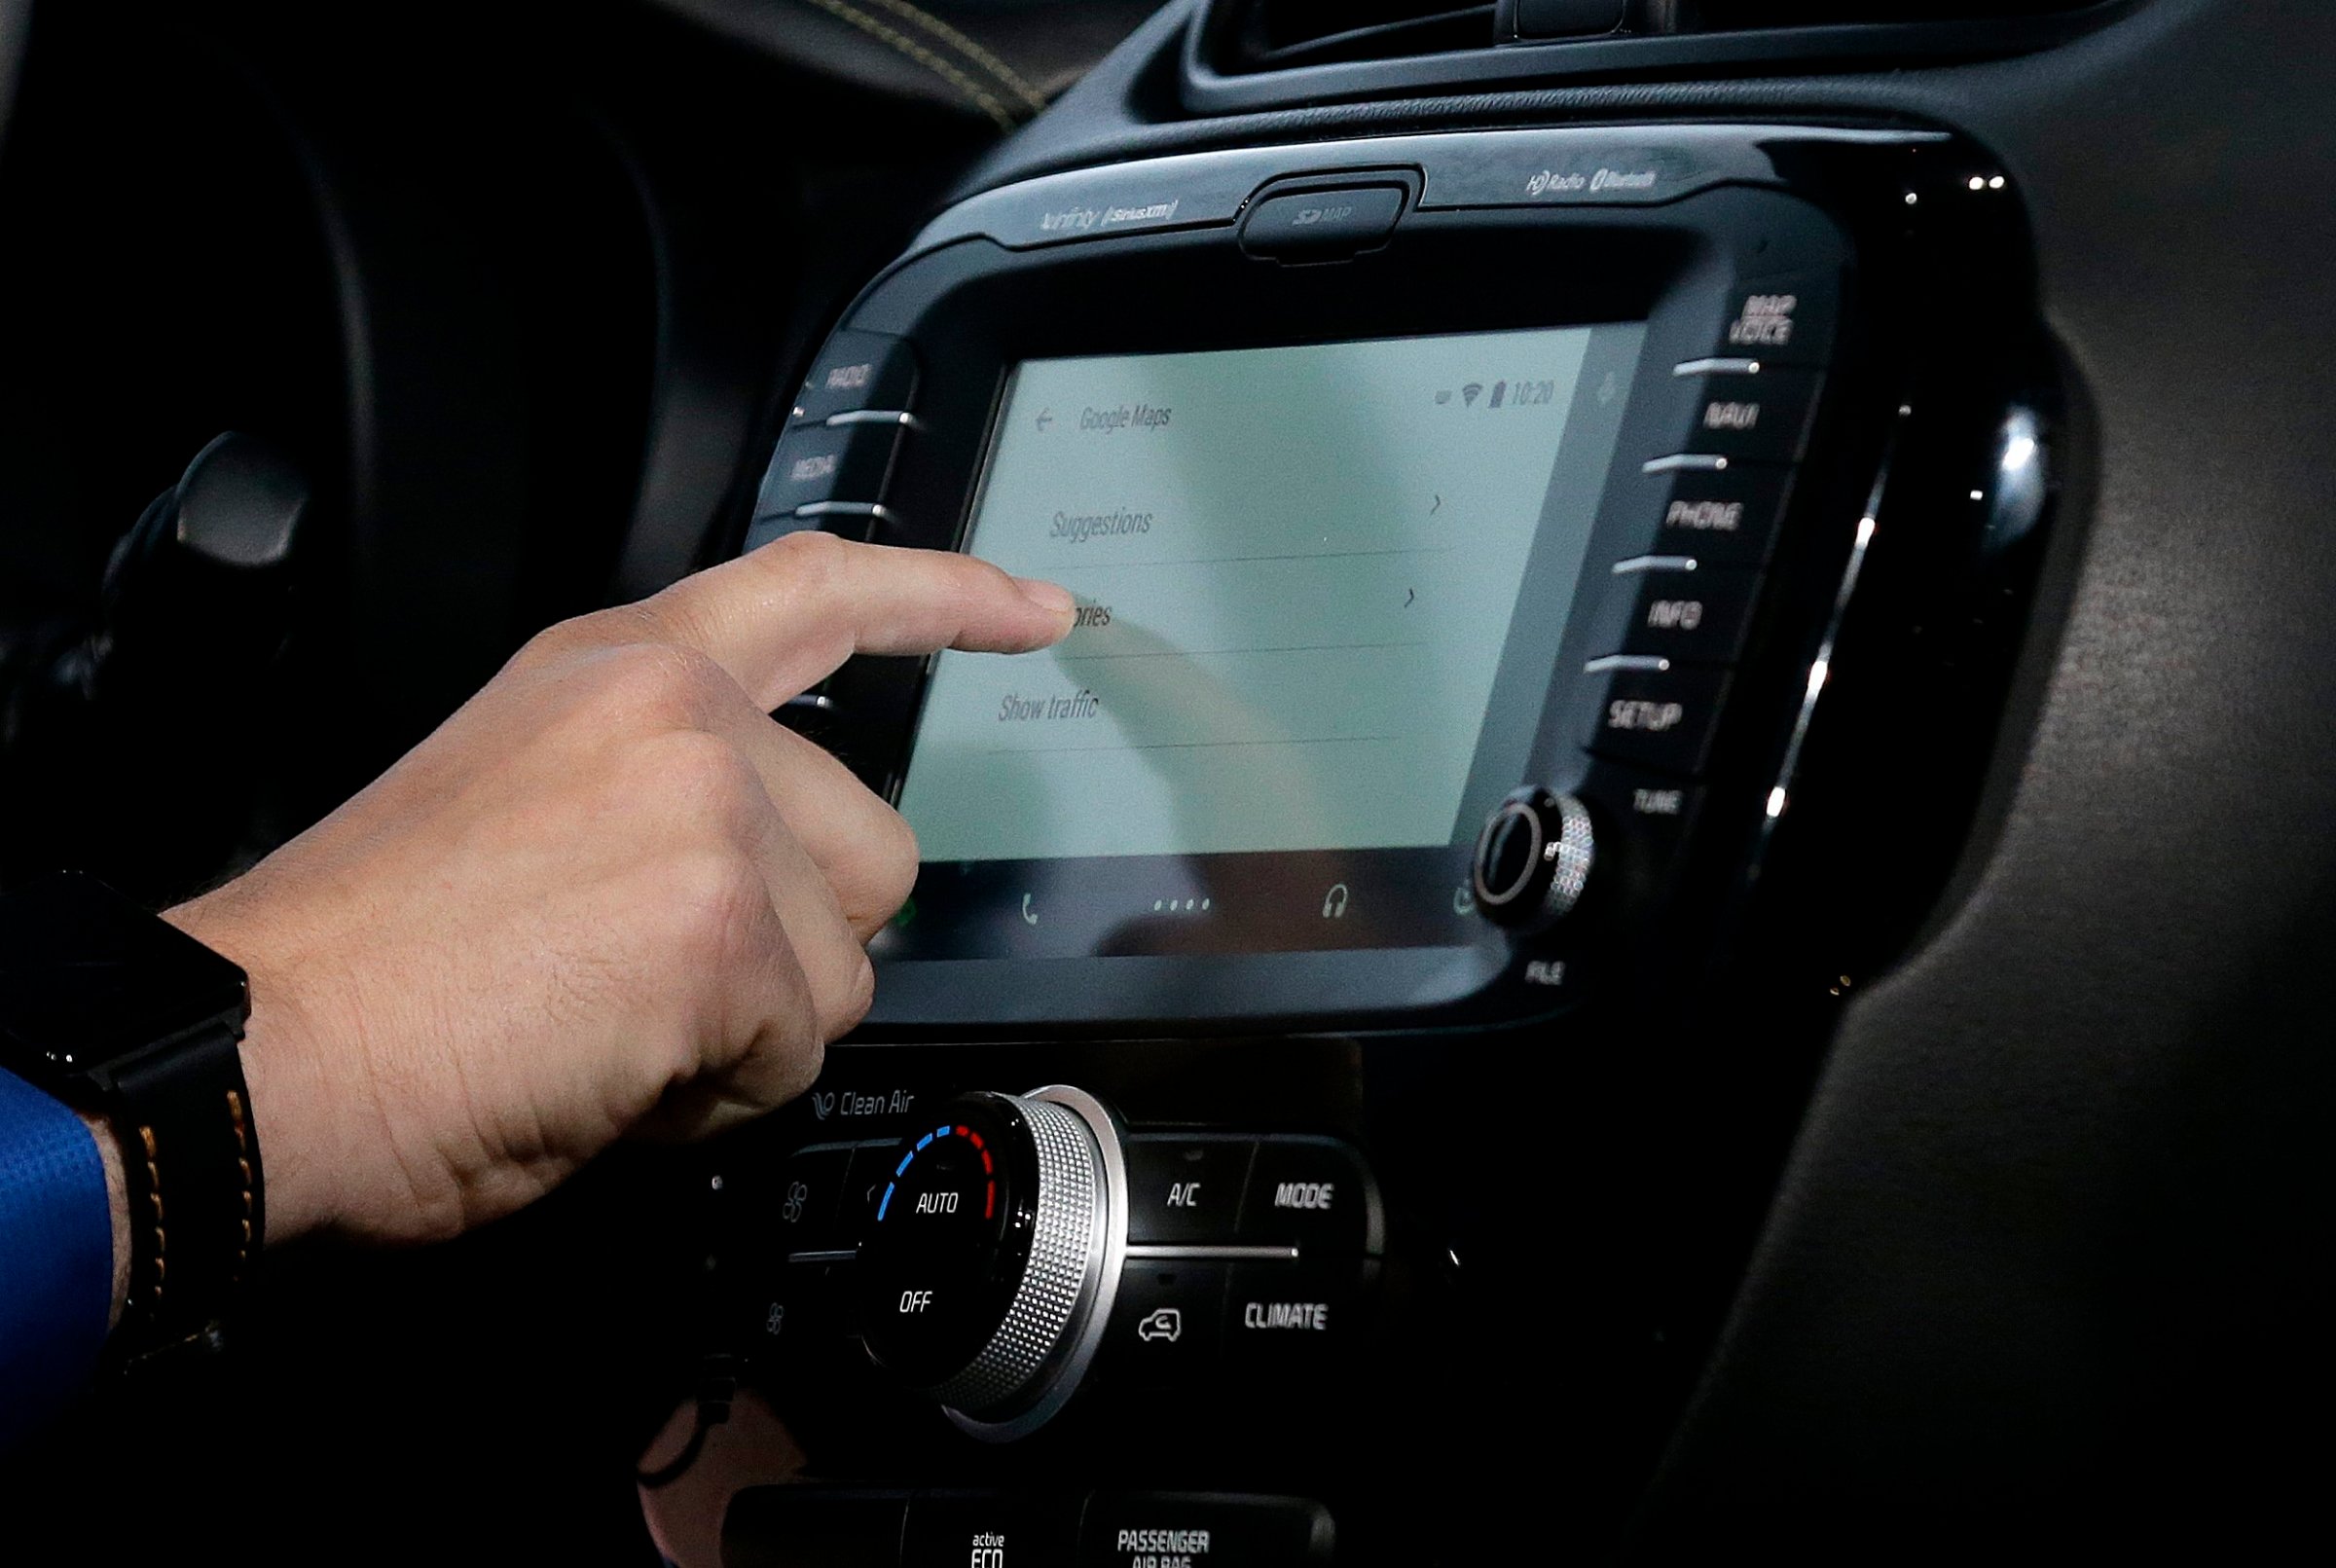 A demonstration of Android Auto is given during the Google I/O 2014 keynote presentation in San Francisco on June 25, 2014.